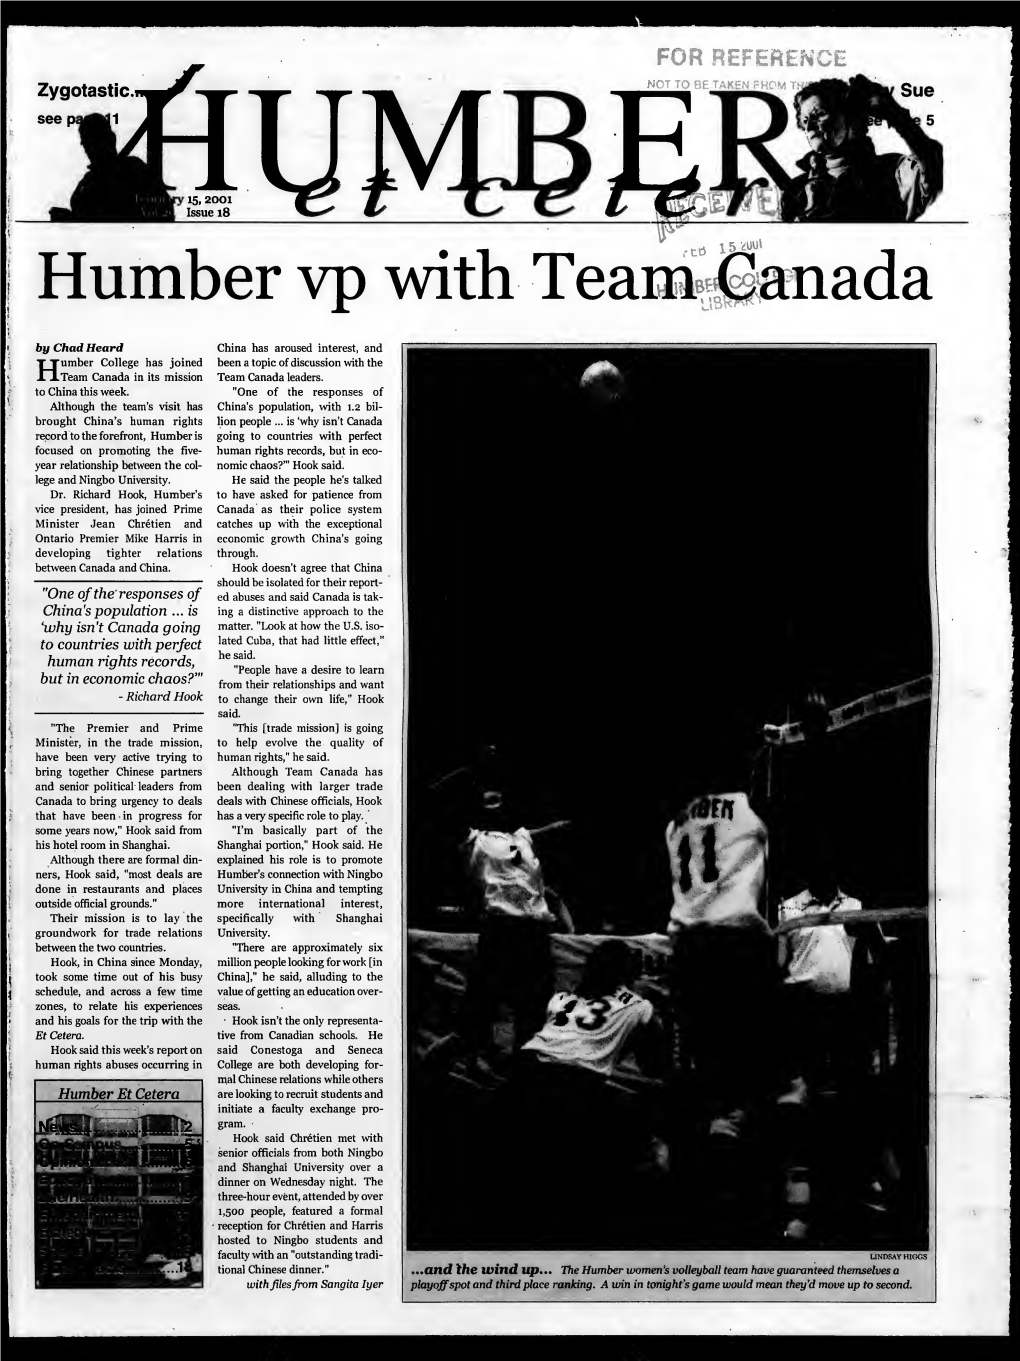 Humber Vp with Team Canada